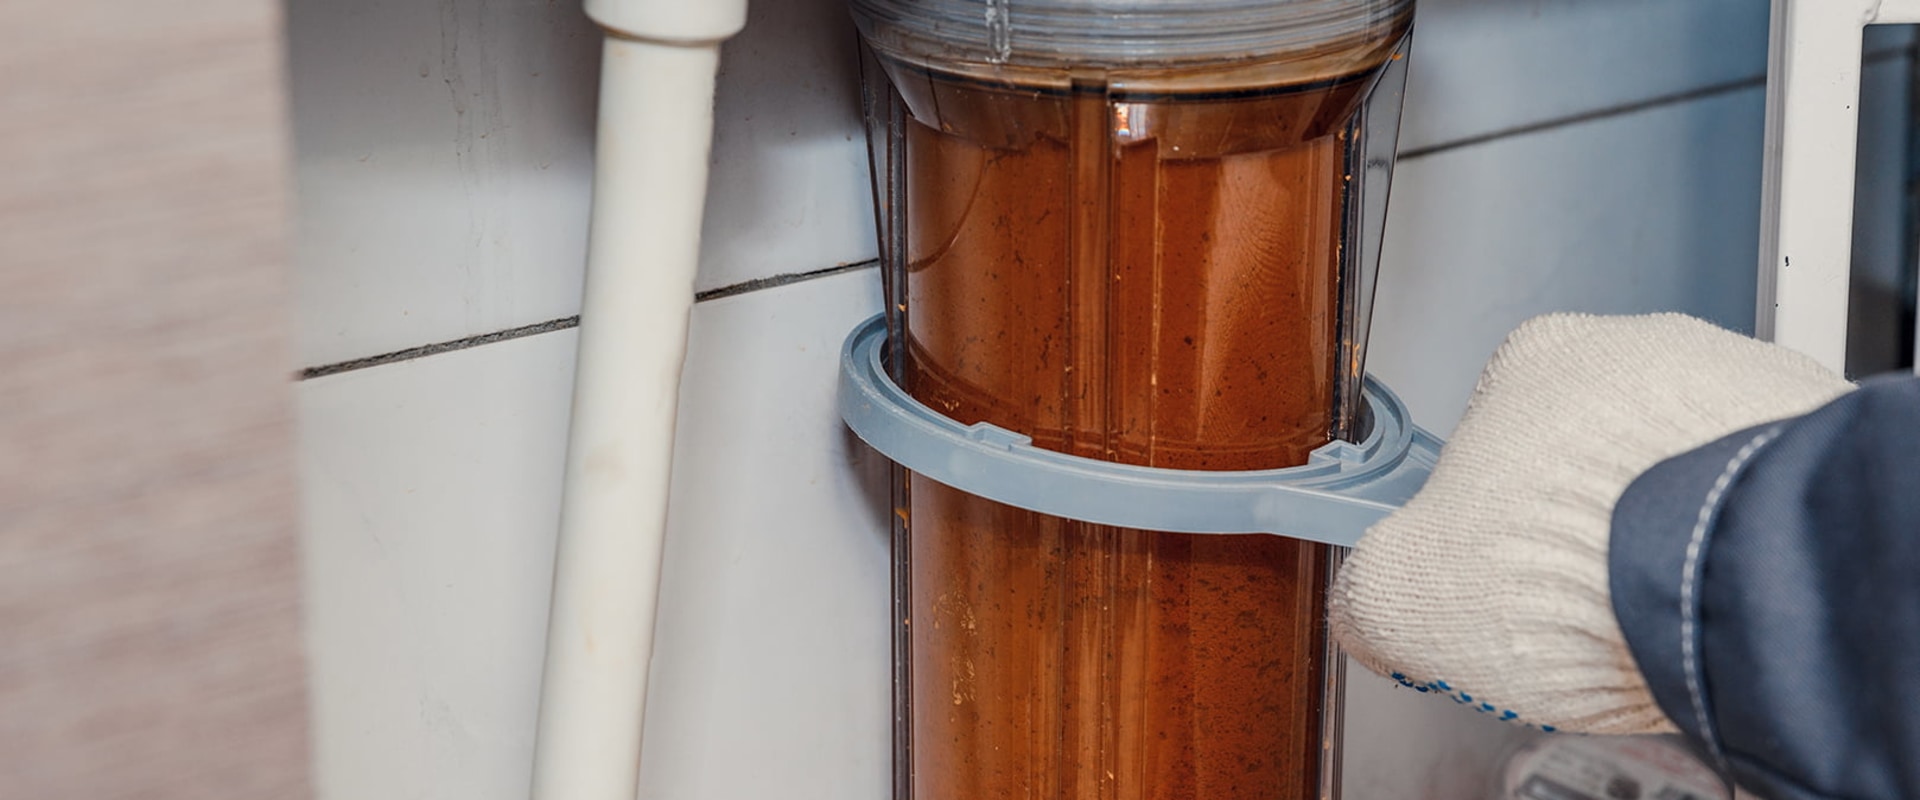 Maintaining Your Carbon Filter-Based Water Filtration System